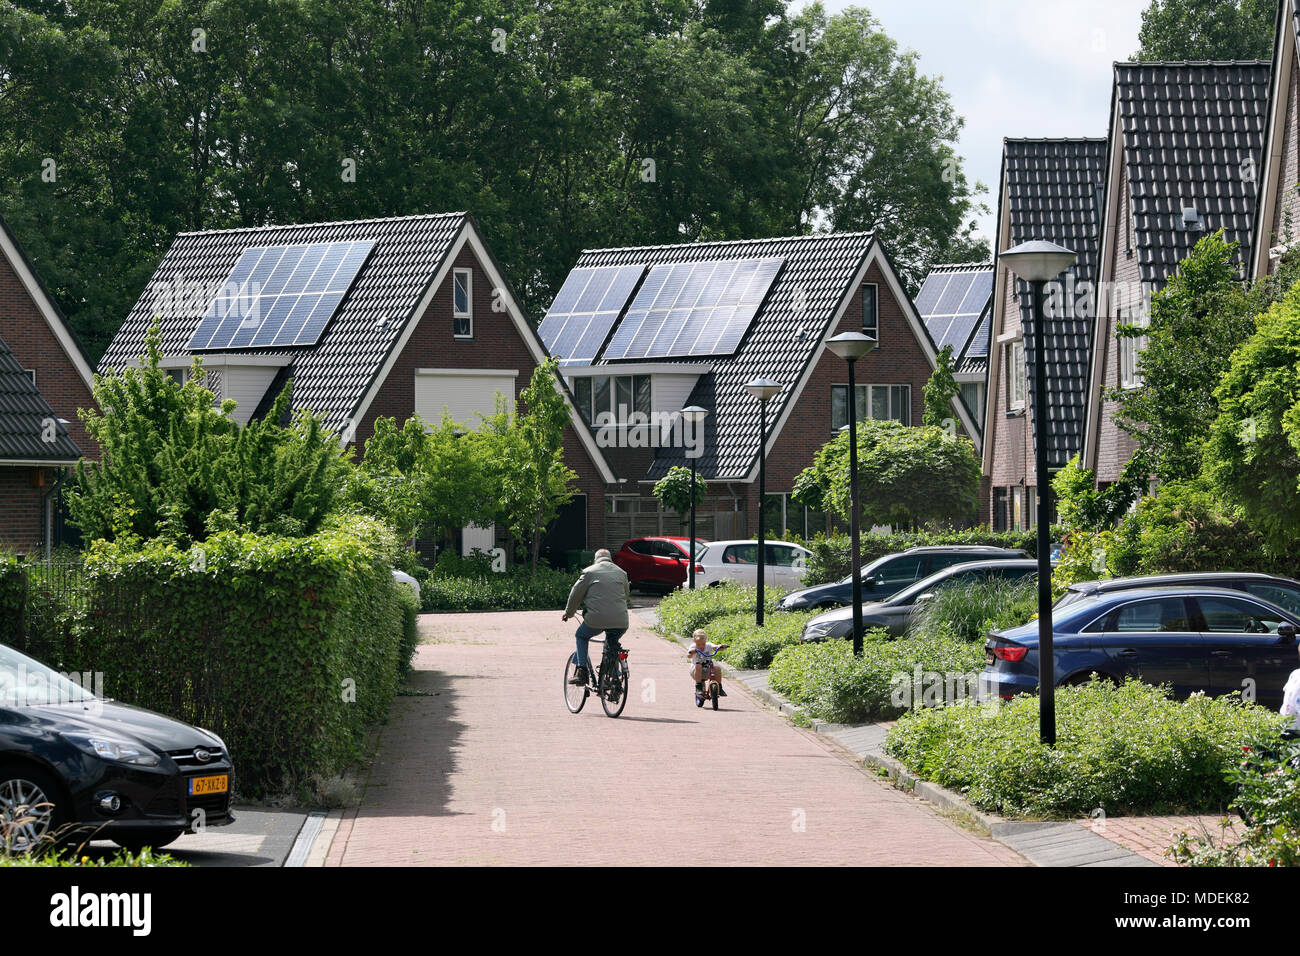 Dutch housing with solar photovoltaic cells on the roofs in Stad van de Zon (City of the Sun), a sustainable suburb of Heerhugowaard, North Holland. Stock Photo